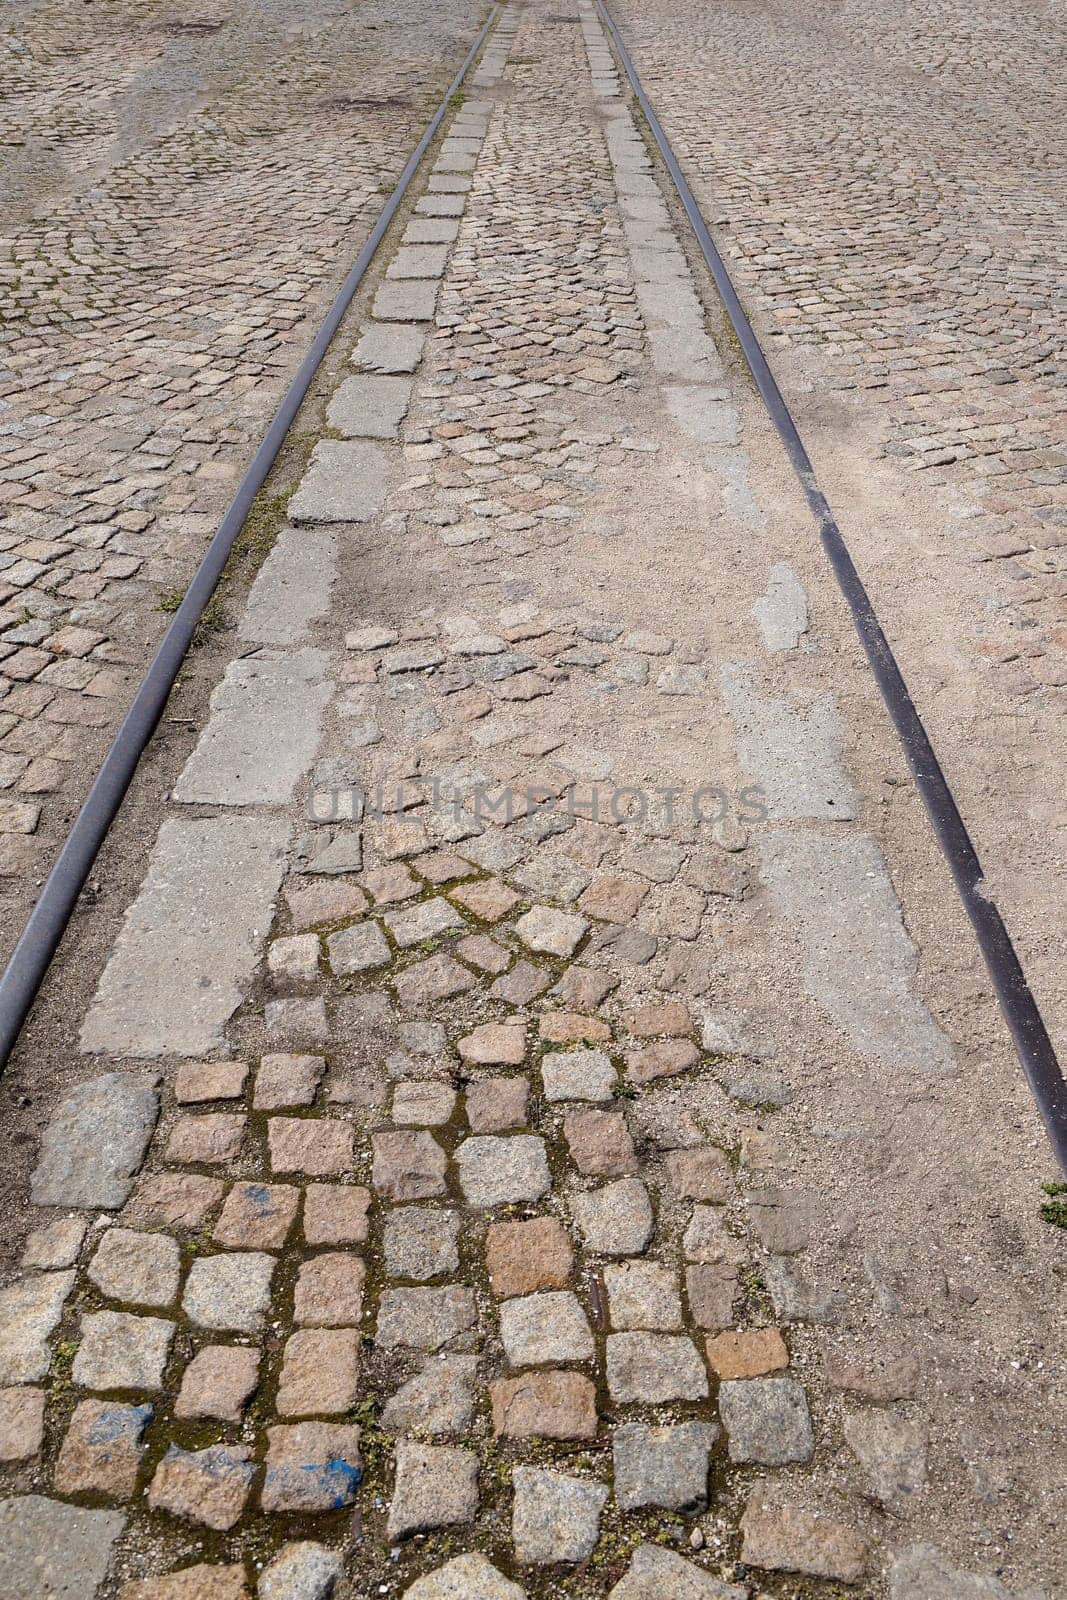 old rails in pavement stone paving for vertical vintage background by Annado